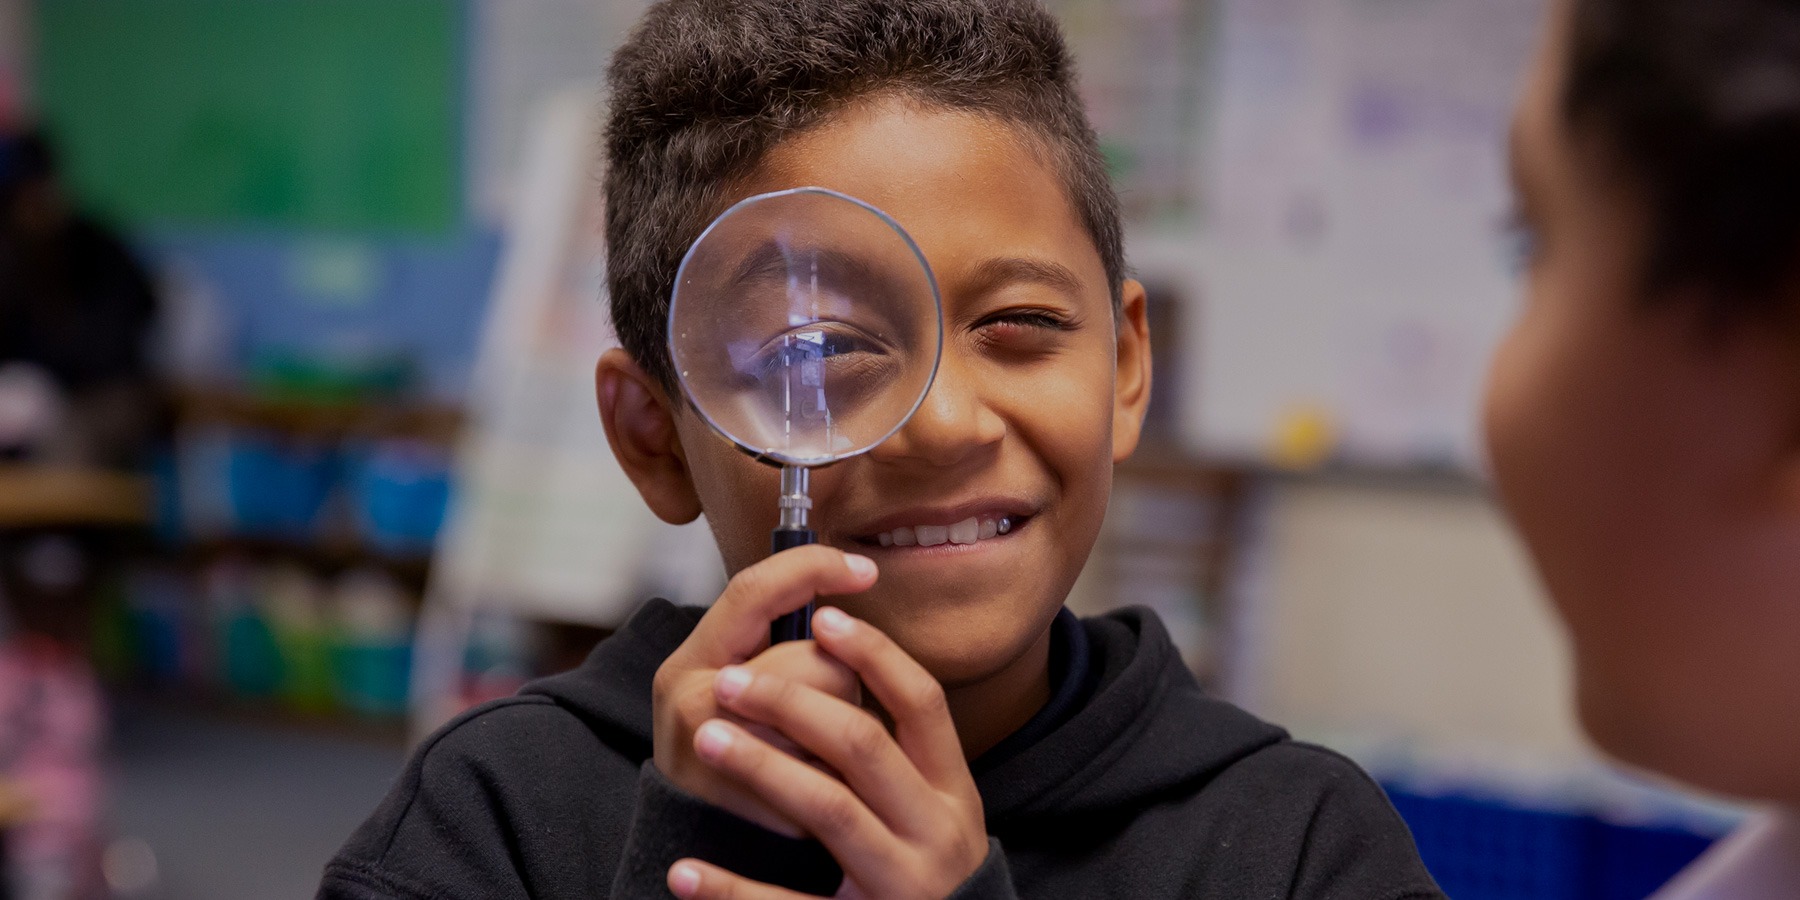 Smiling Student with Magnifying Glass